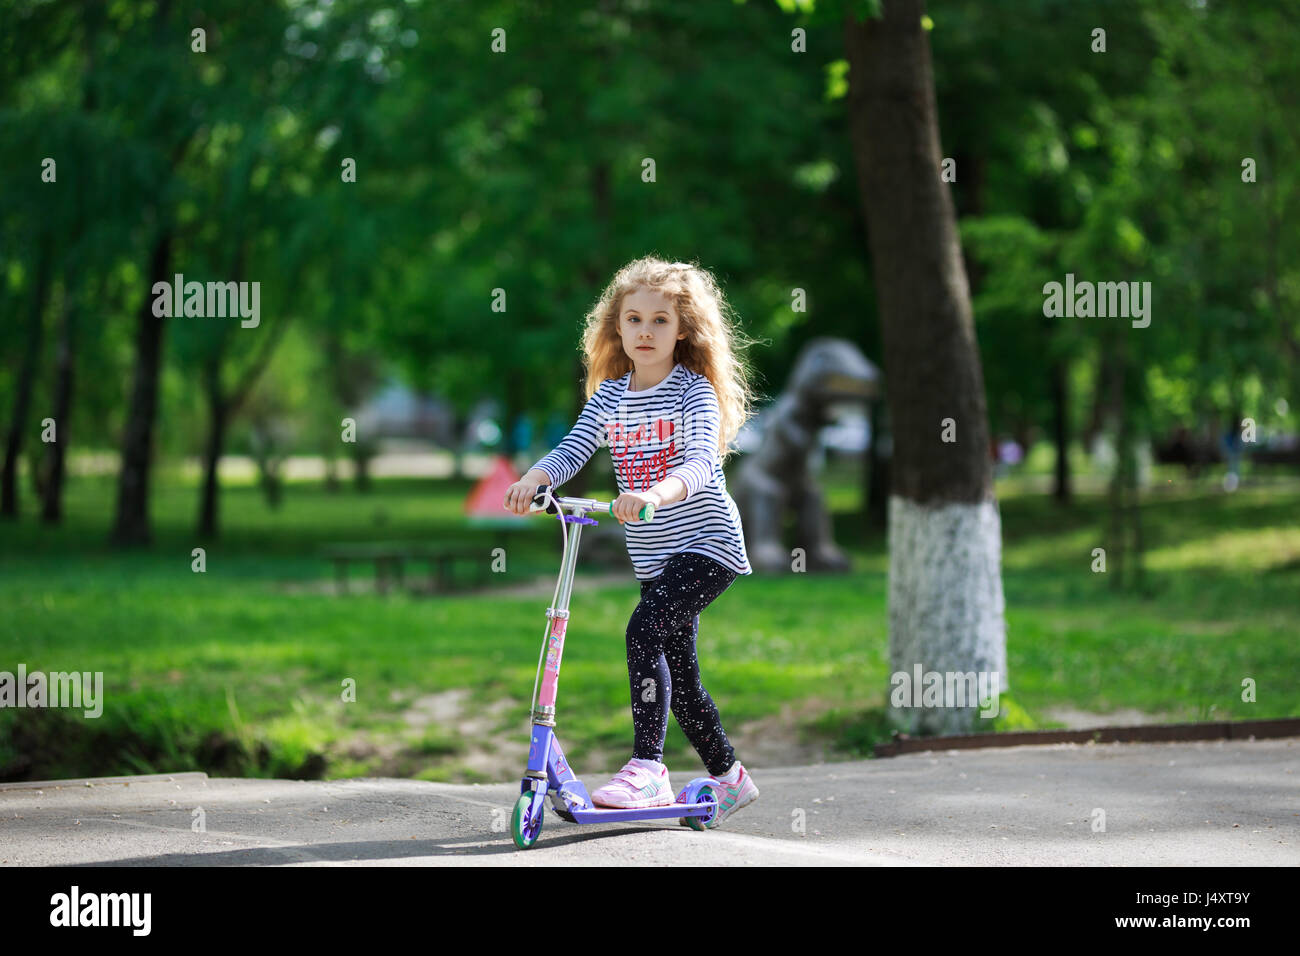 Little blonde girl ride the scooter in the park. Stock Photo